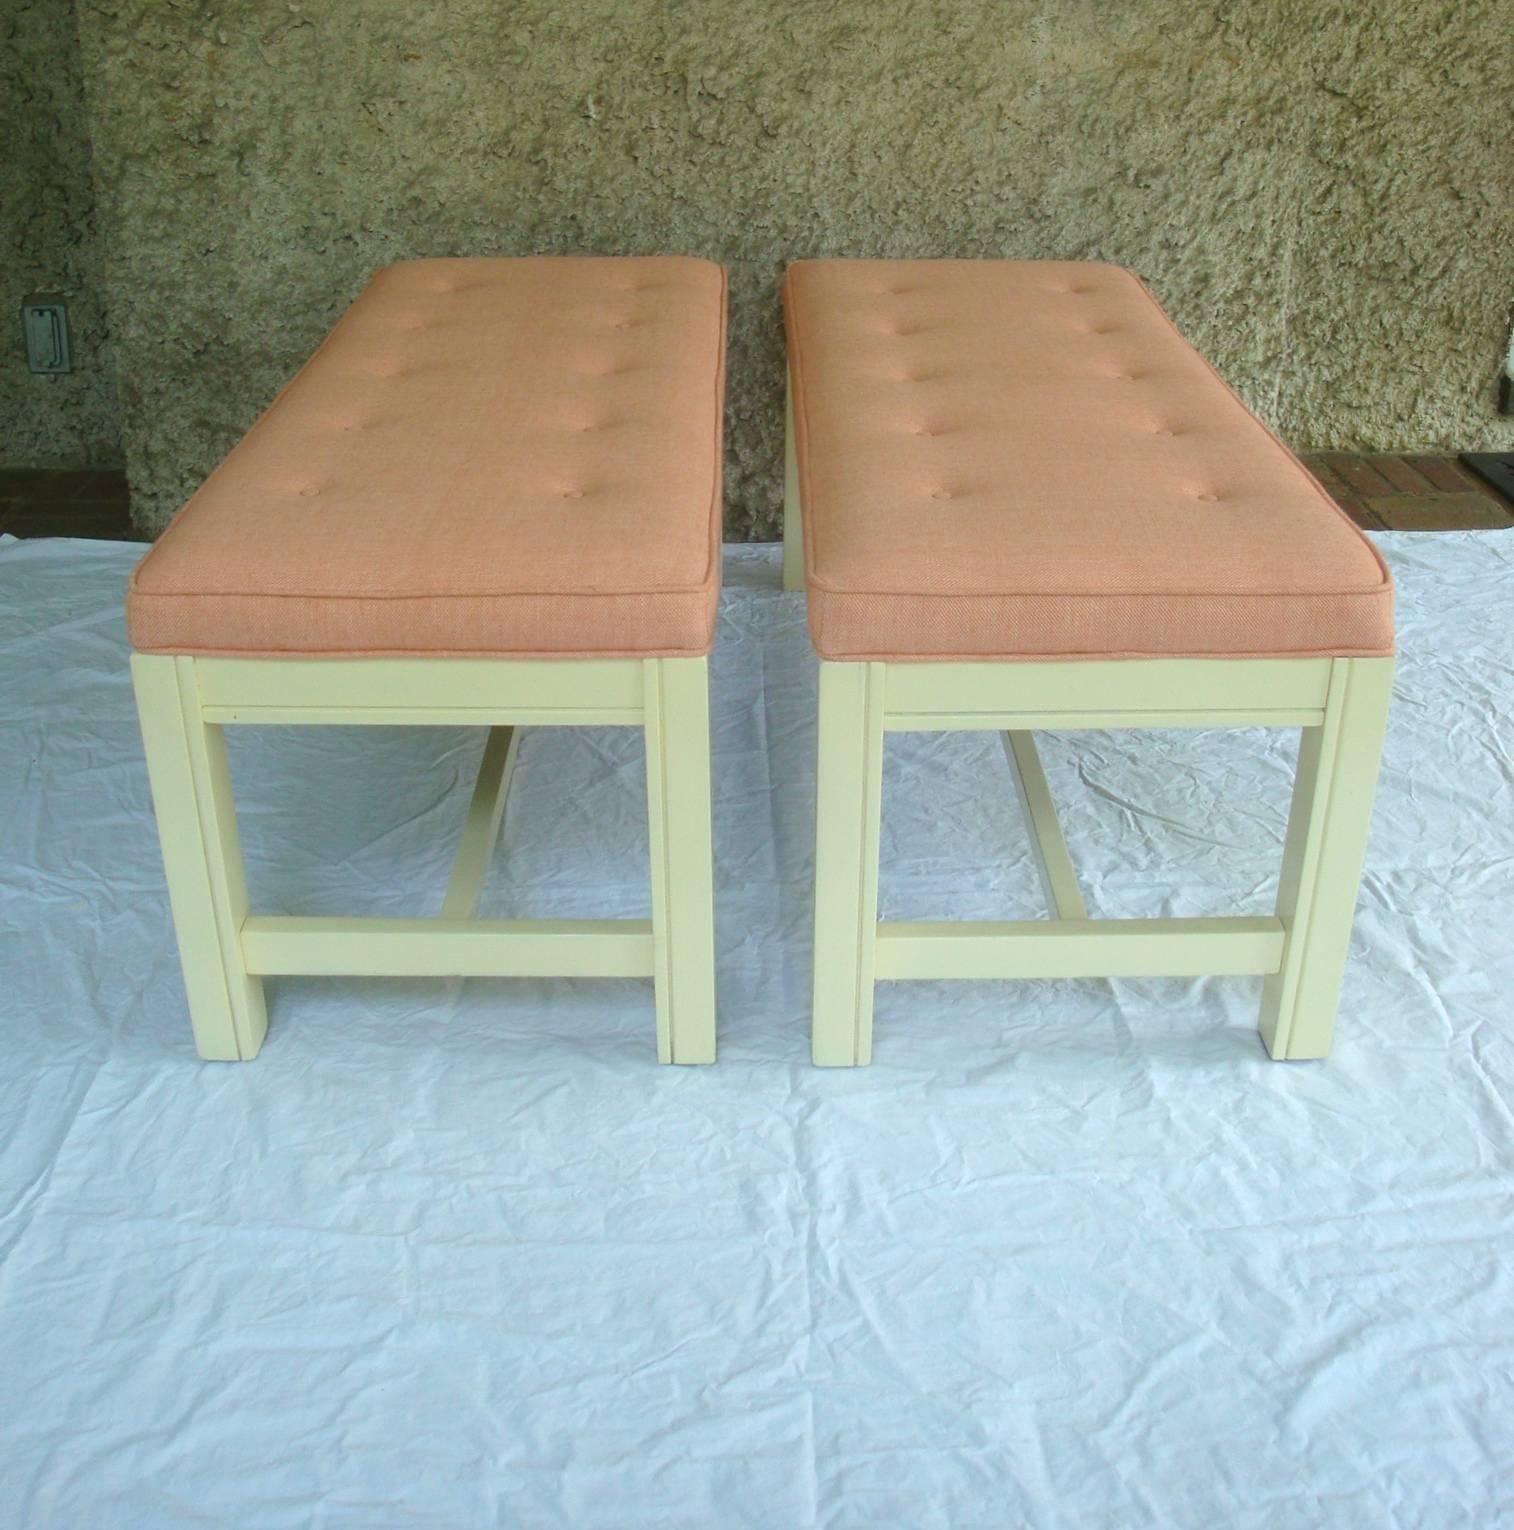 Offered is a gorgeous, pair of 1960s long Parsons benches. These very sturdy pieces have been recently reupholstered in a nubby soft-orange linen-blend fabric by Thibaut, with button tufting on the attached cushions and welting around the edges. The